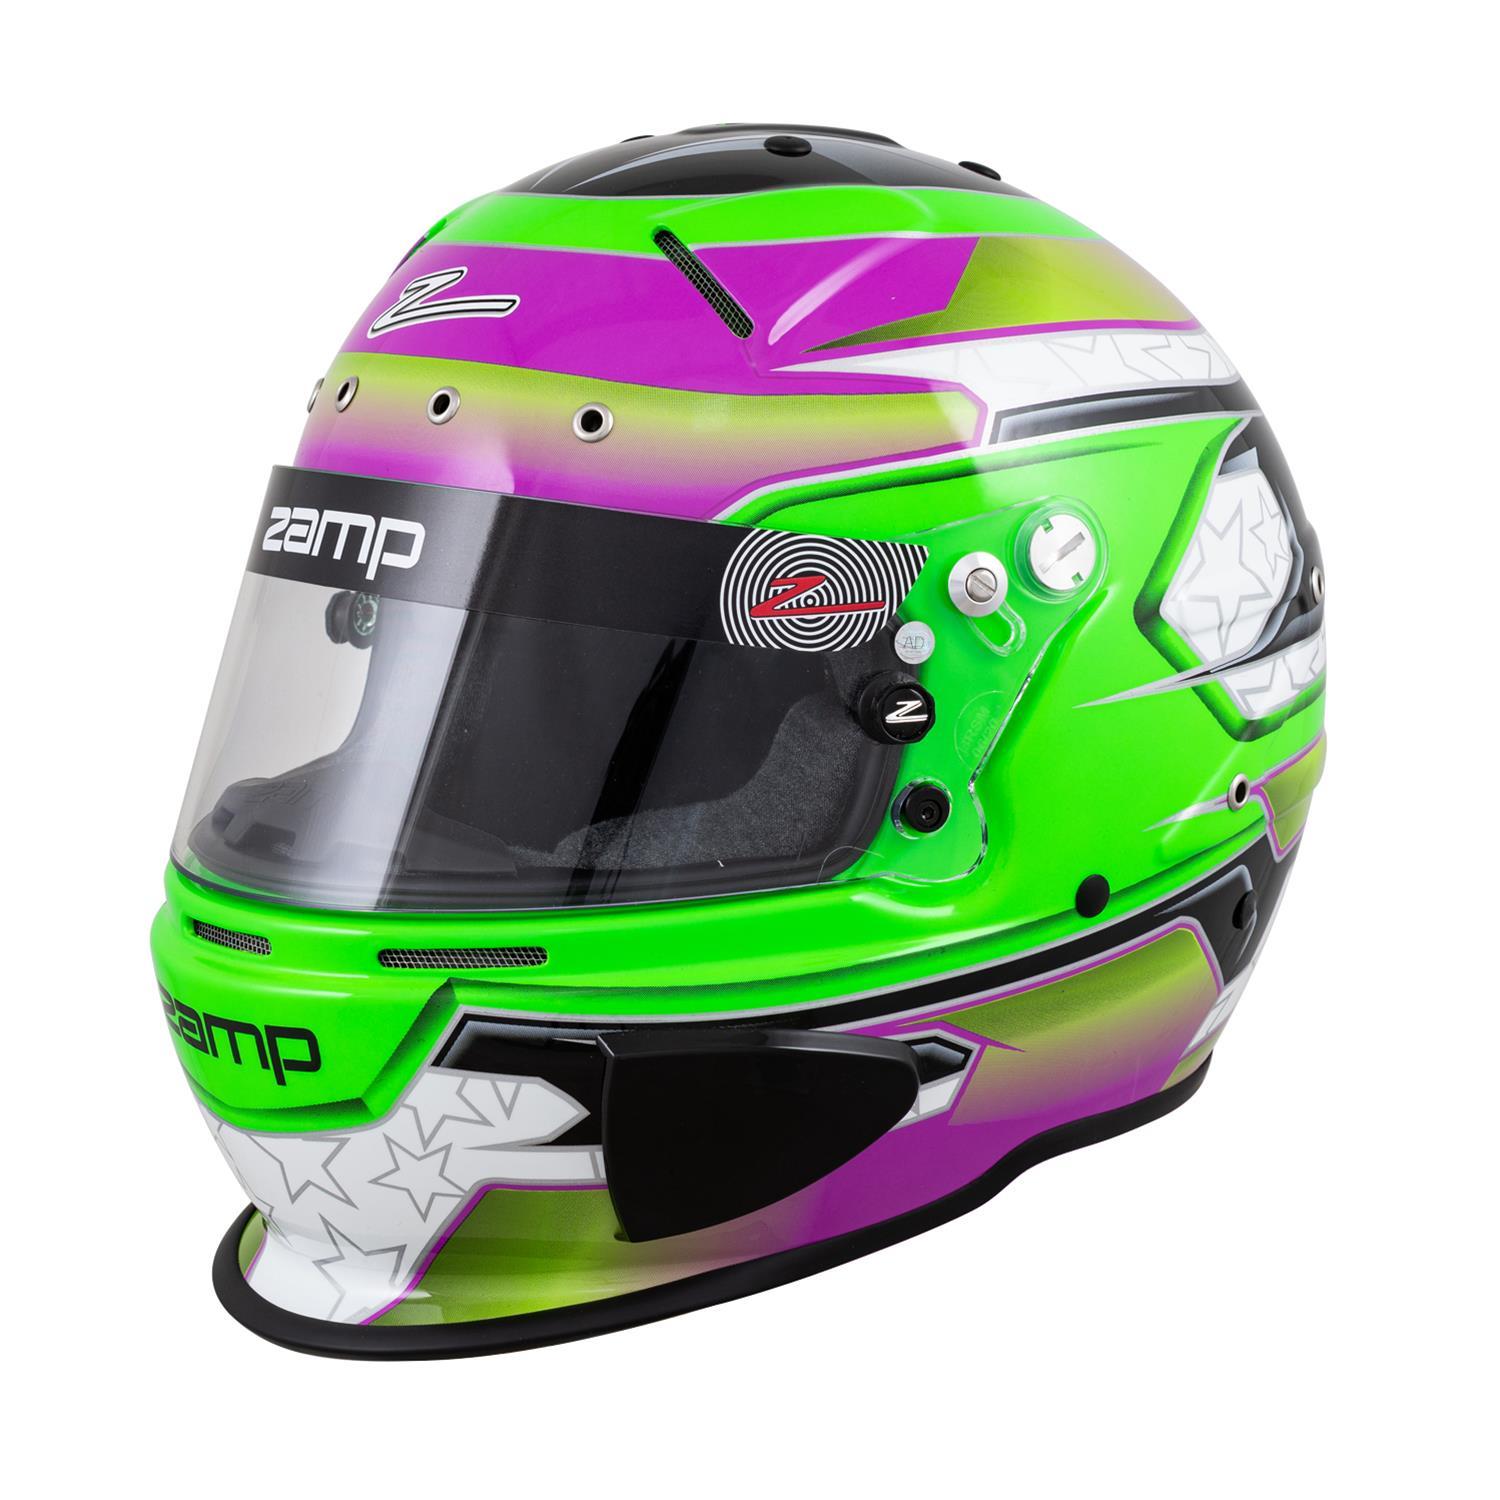 Zamp Racing H760C39XL Helmet, RZ-70E Switch, Snell SA2020, FIA Approved, Head and Neck Support Ready, Gloss Green / Purple, X-Large, Each